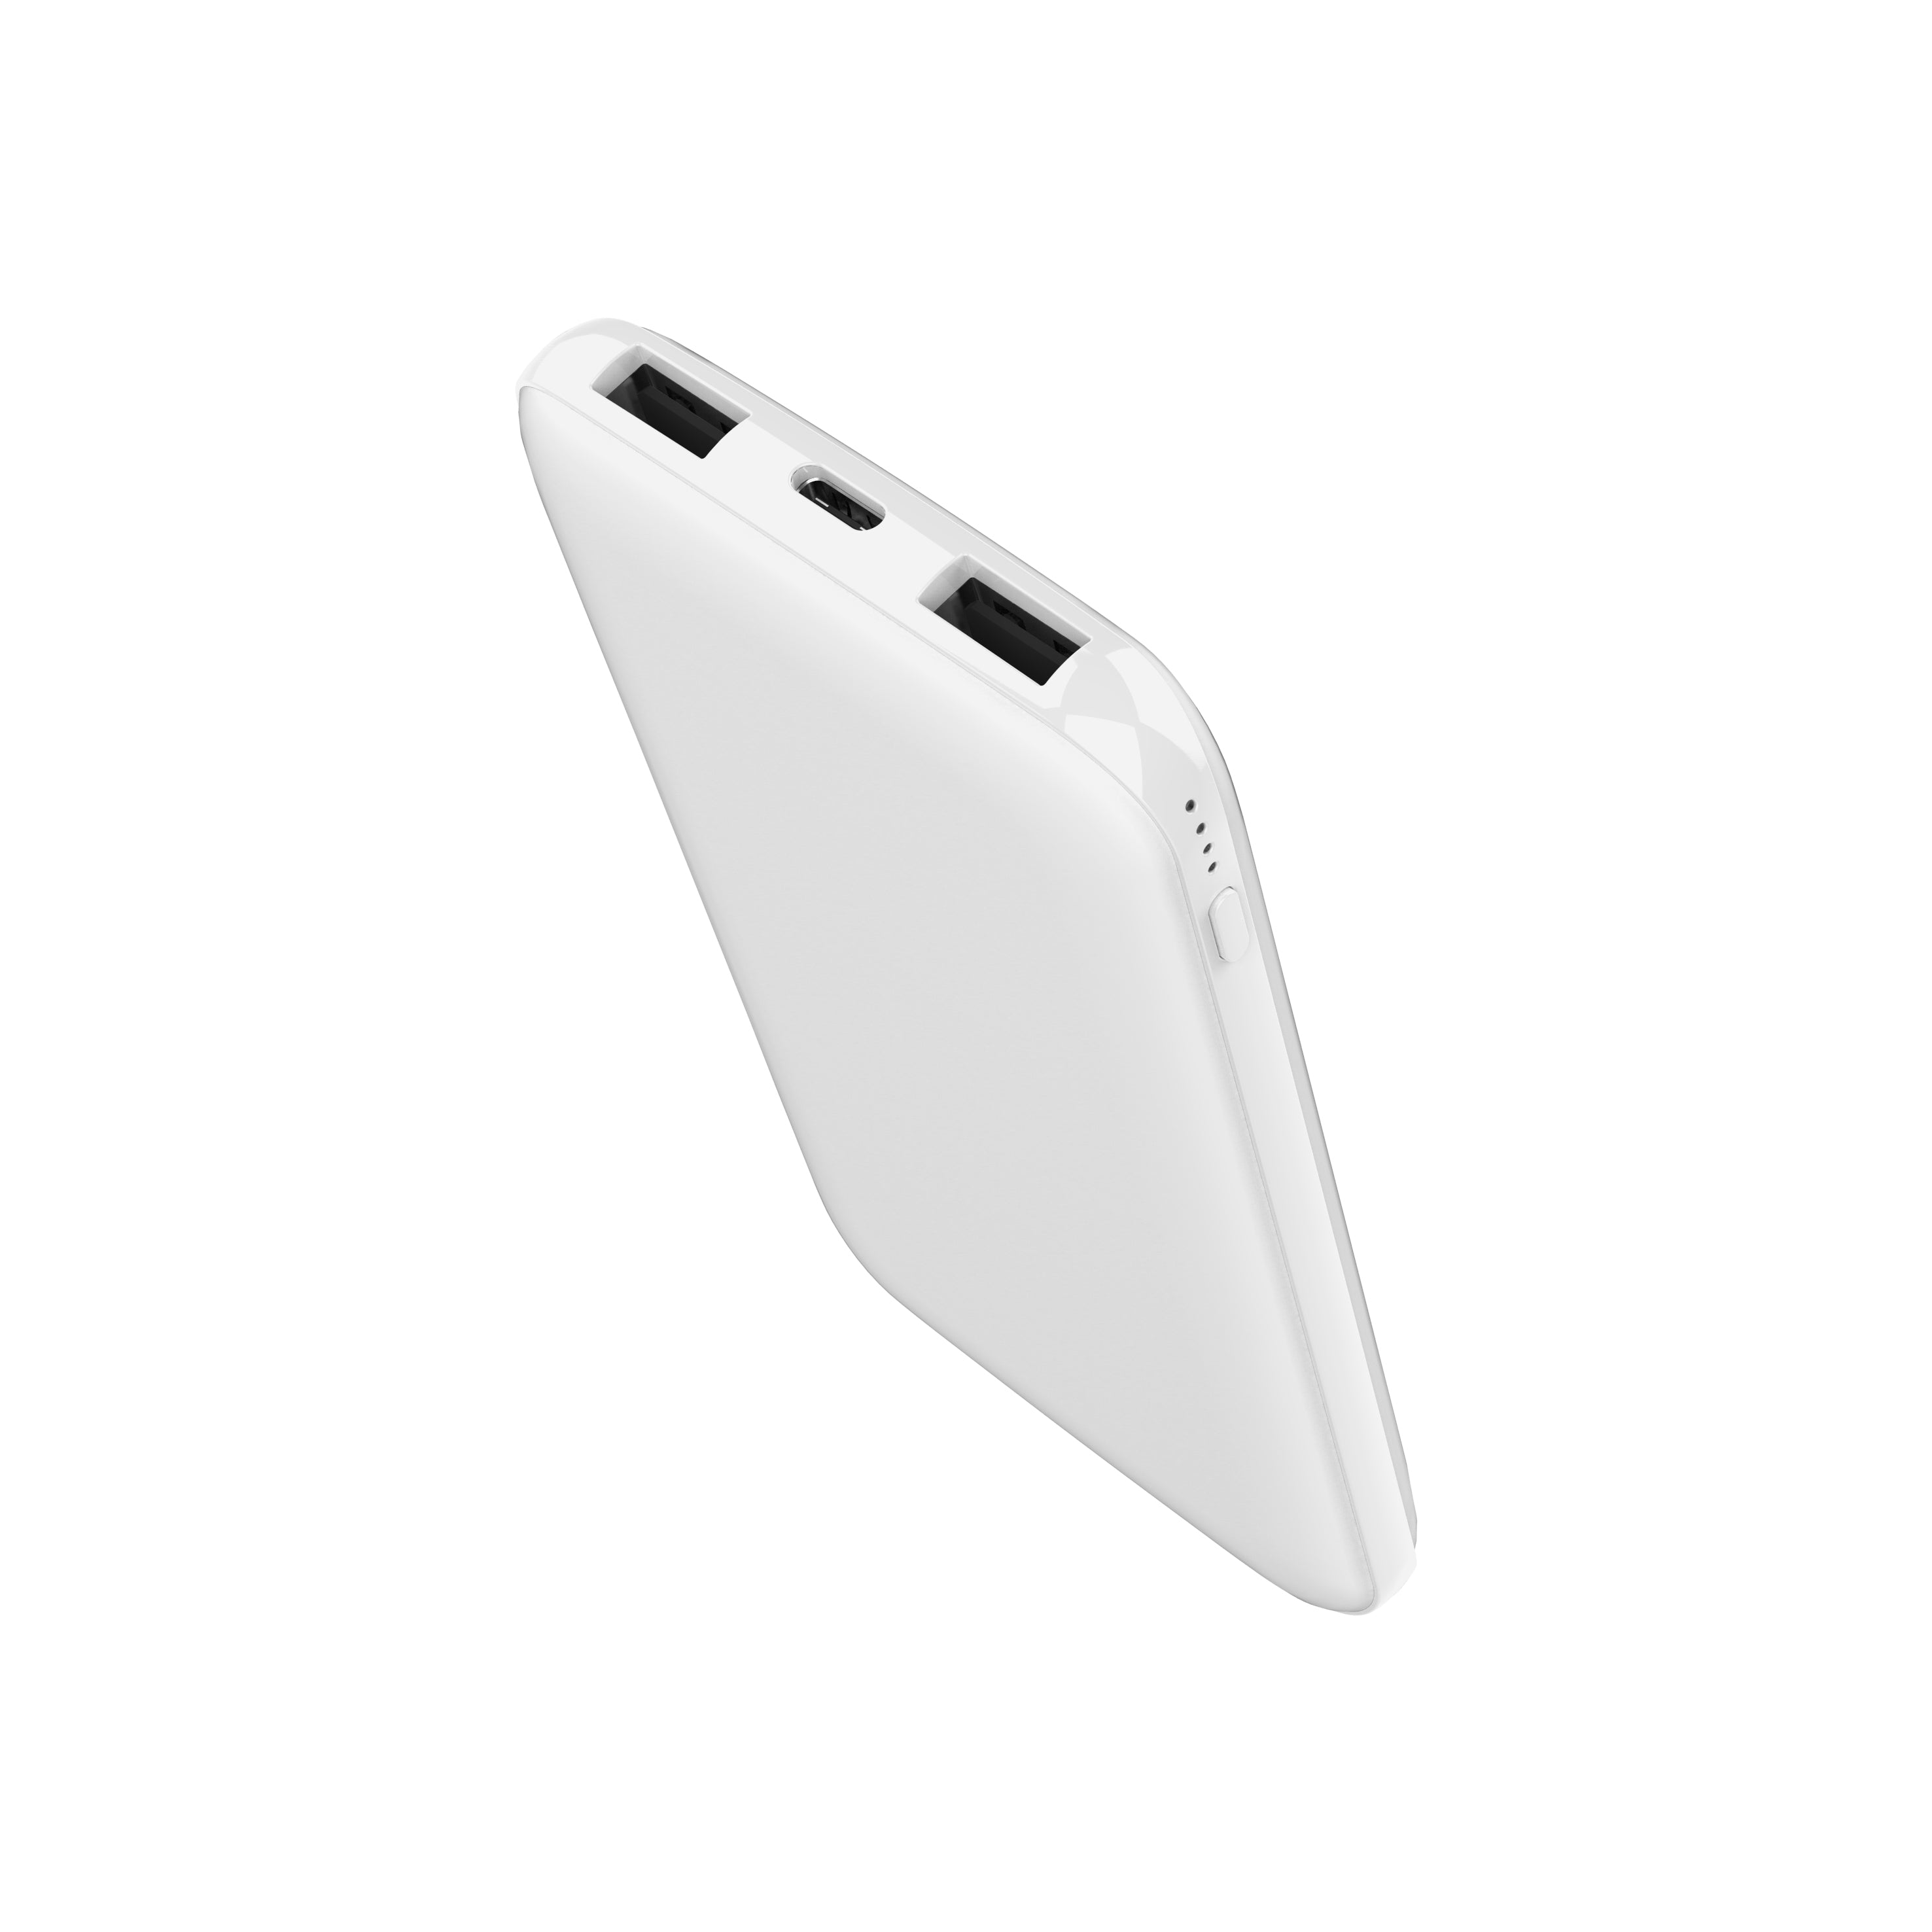 REF Power Fast Charge "C-Port" Portable Power Bank in White